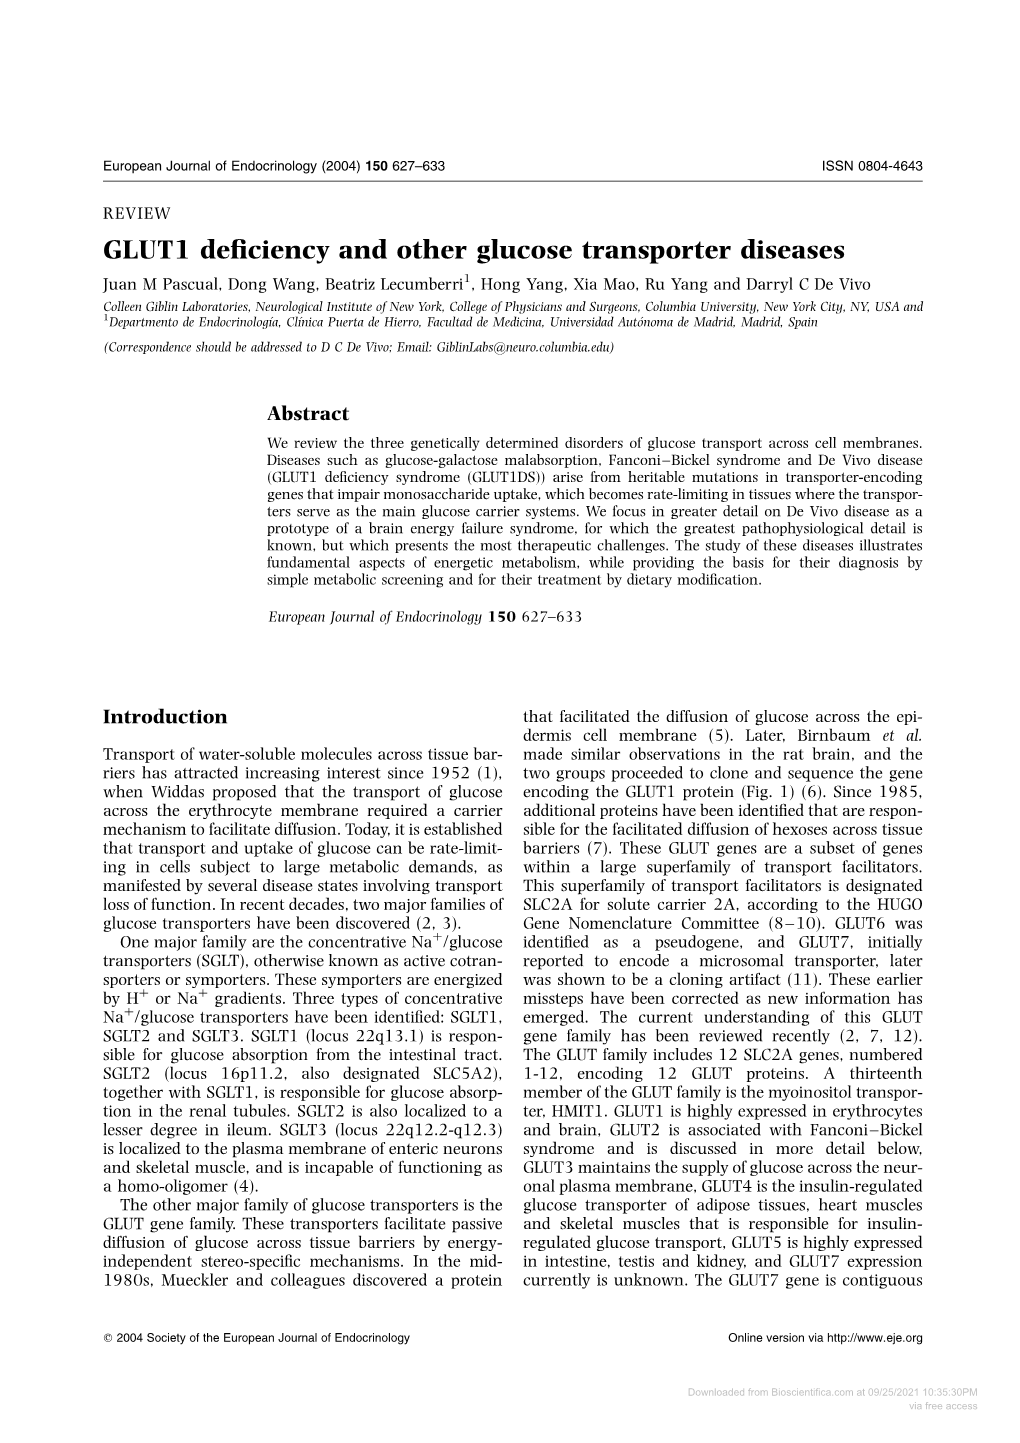 GLUT1 Deficiency and Other Glucose Transporter Diseases